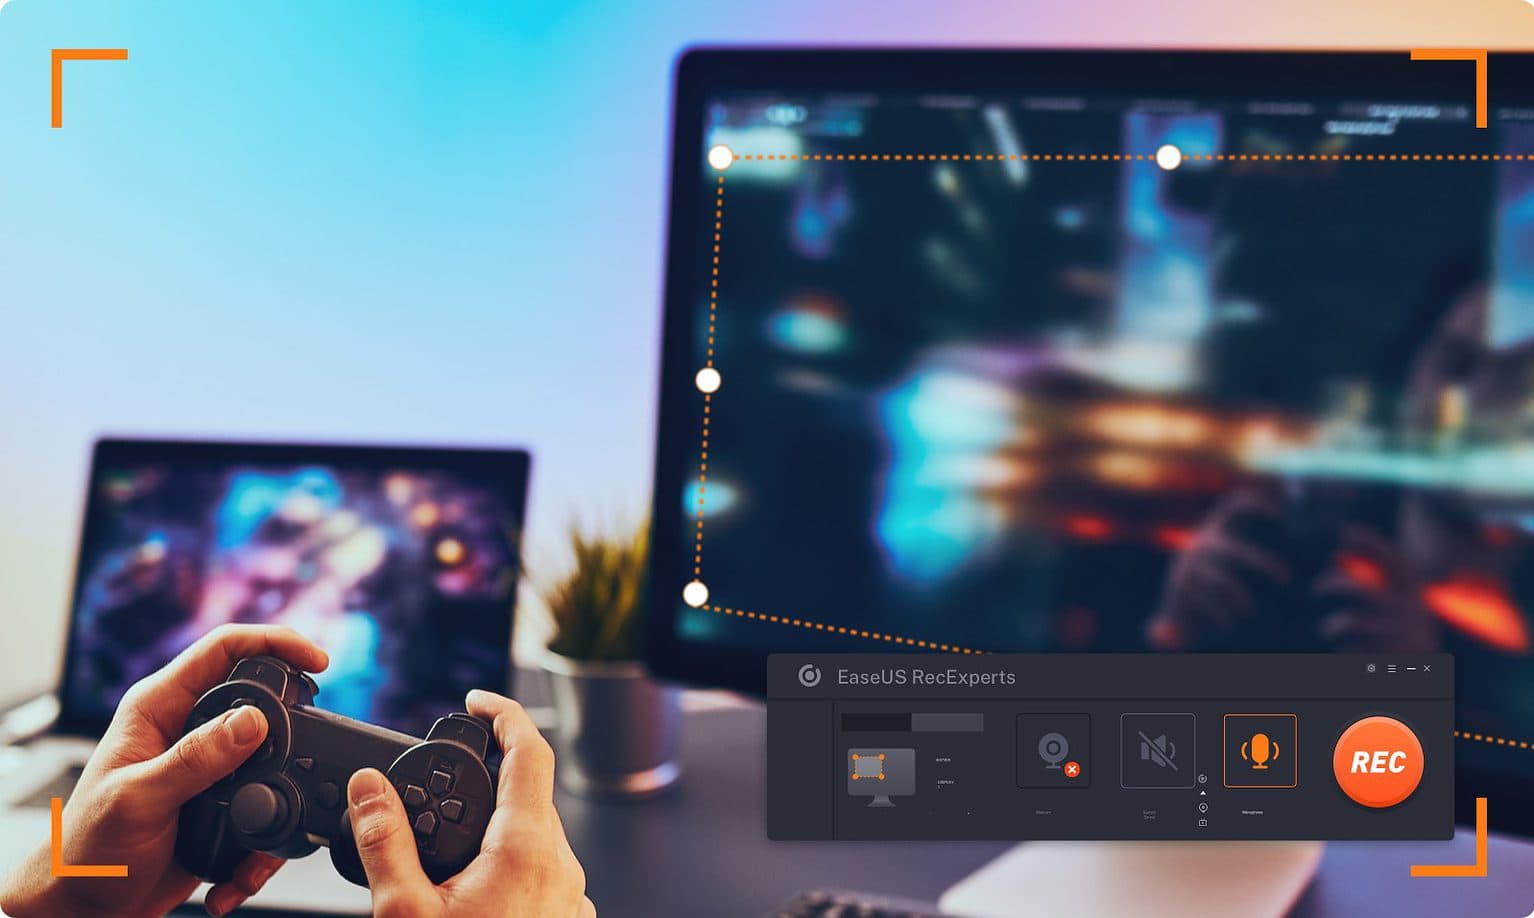 When you want to record gameplay on a Mac, you've got options -- including EaseUS RecExperts.